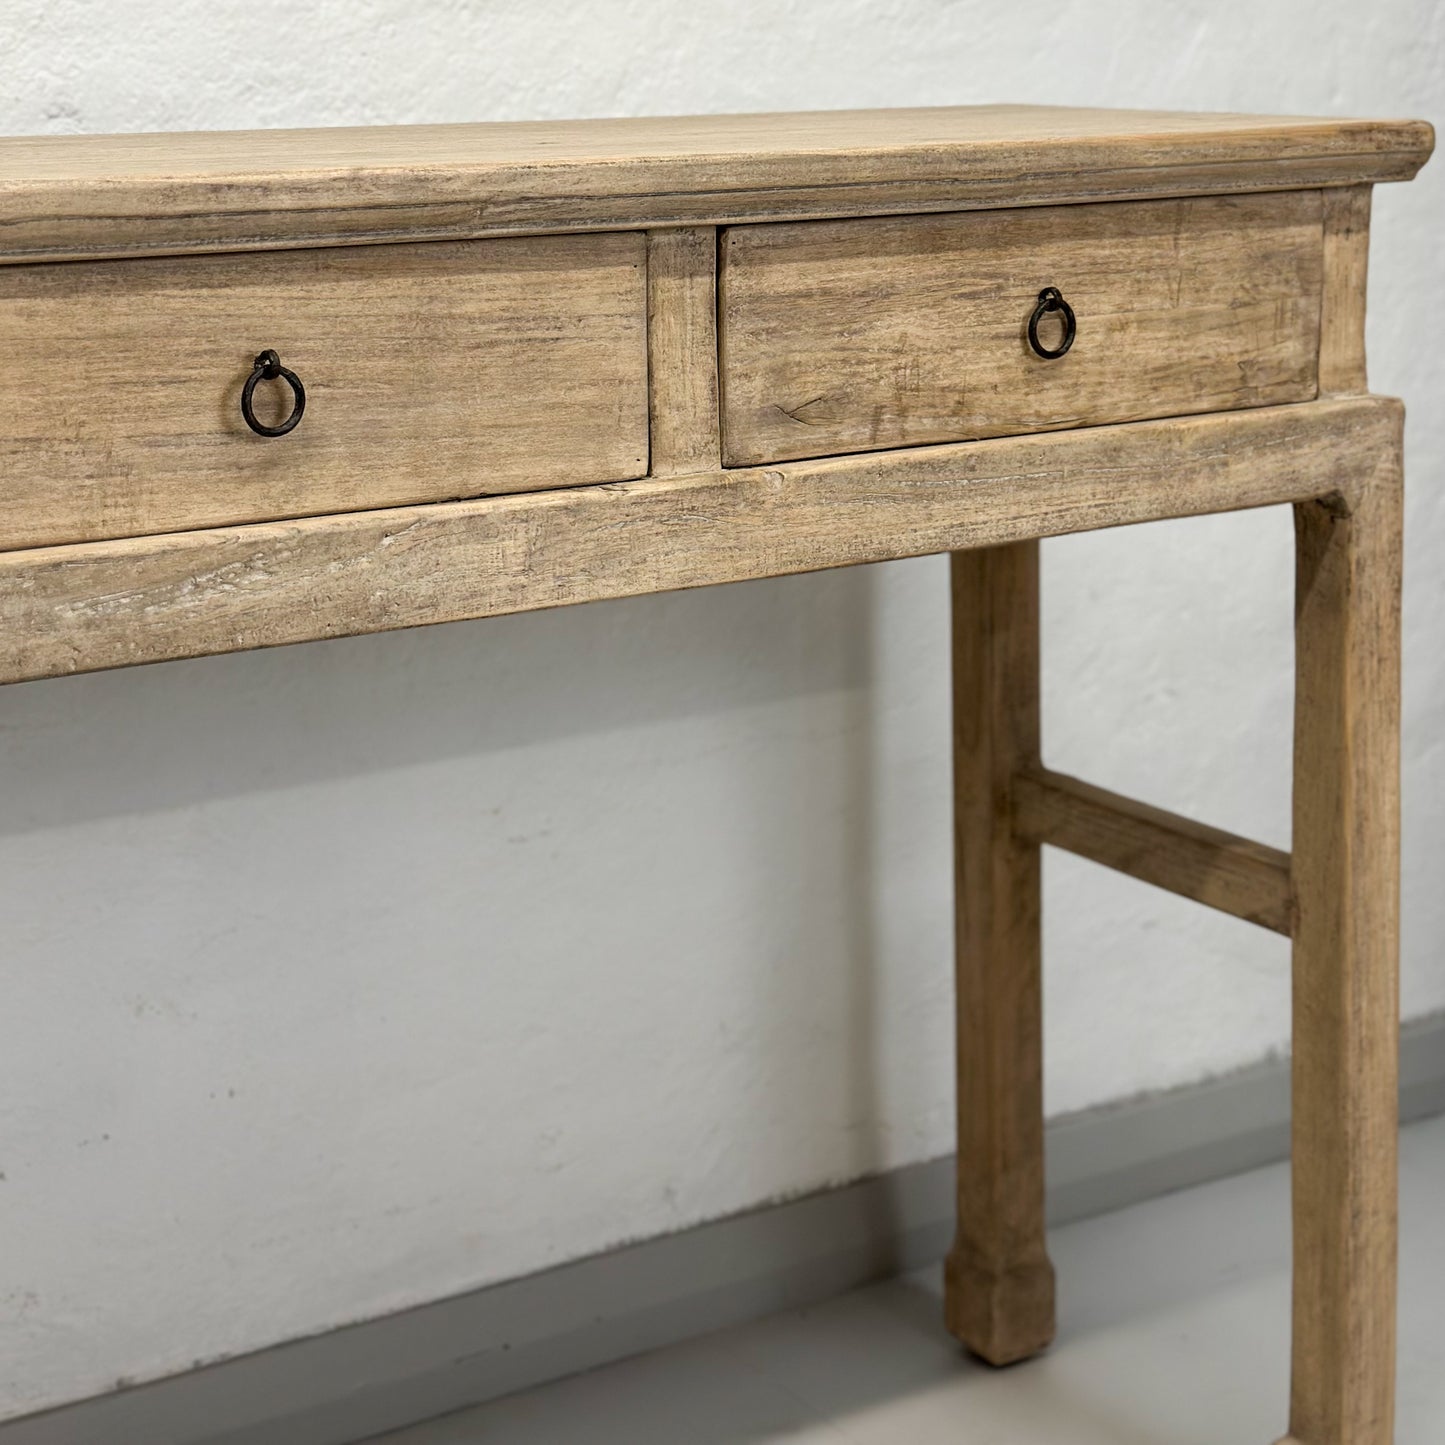 Antique Elm 4 Drawer Console Table